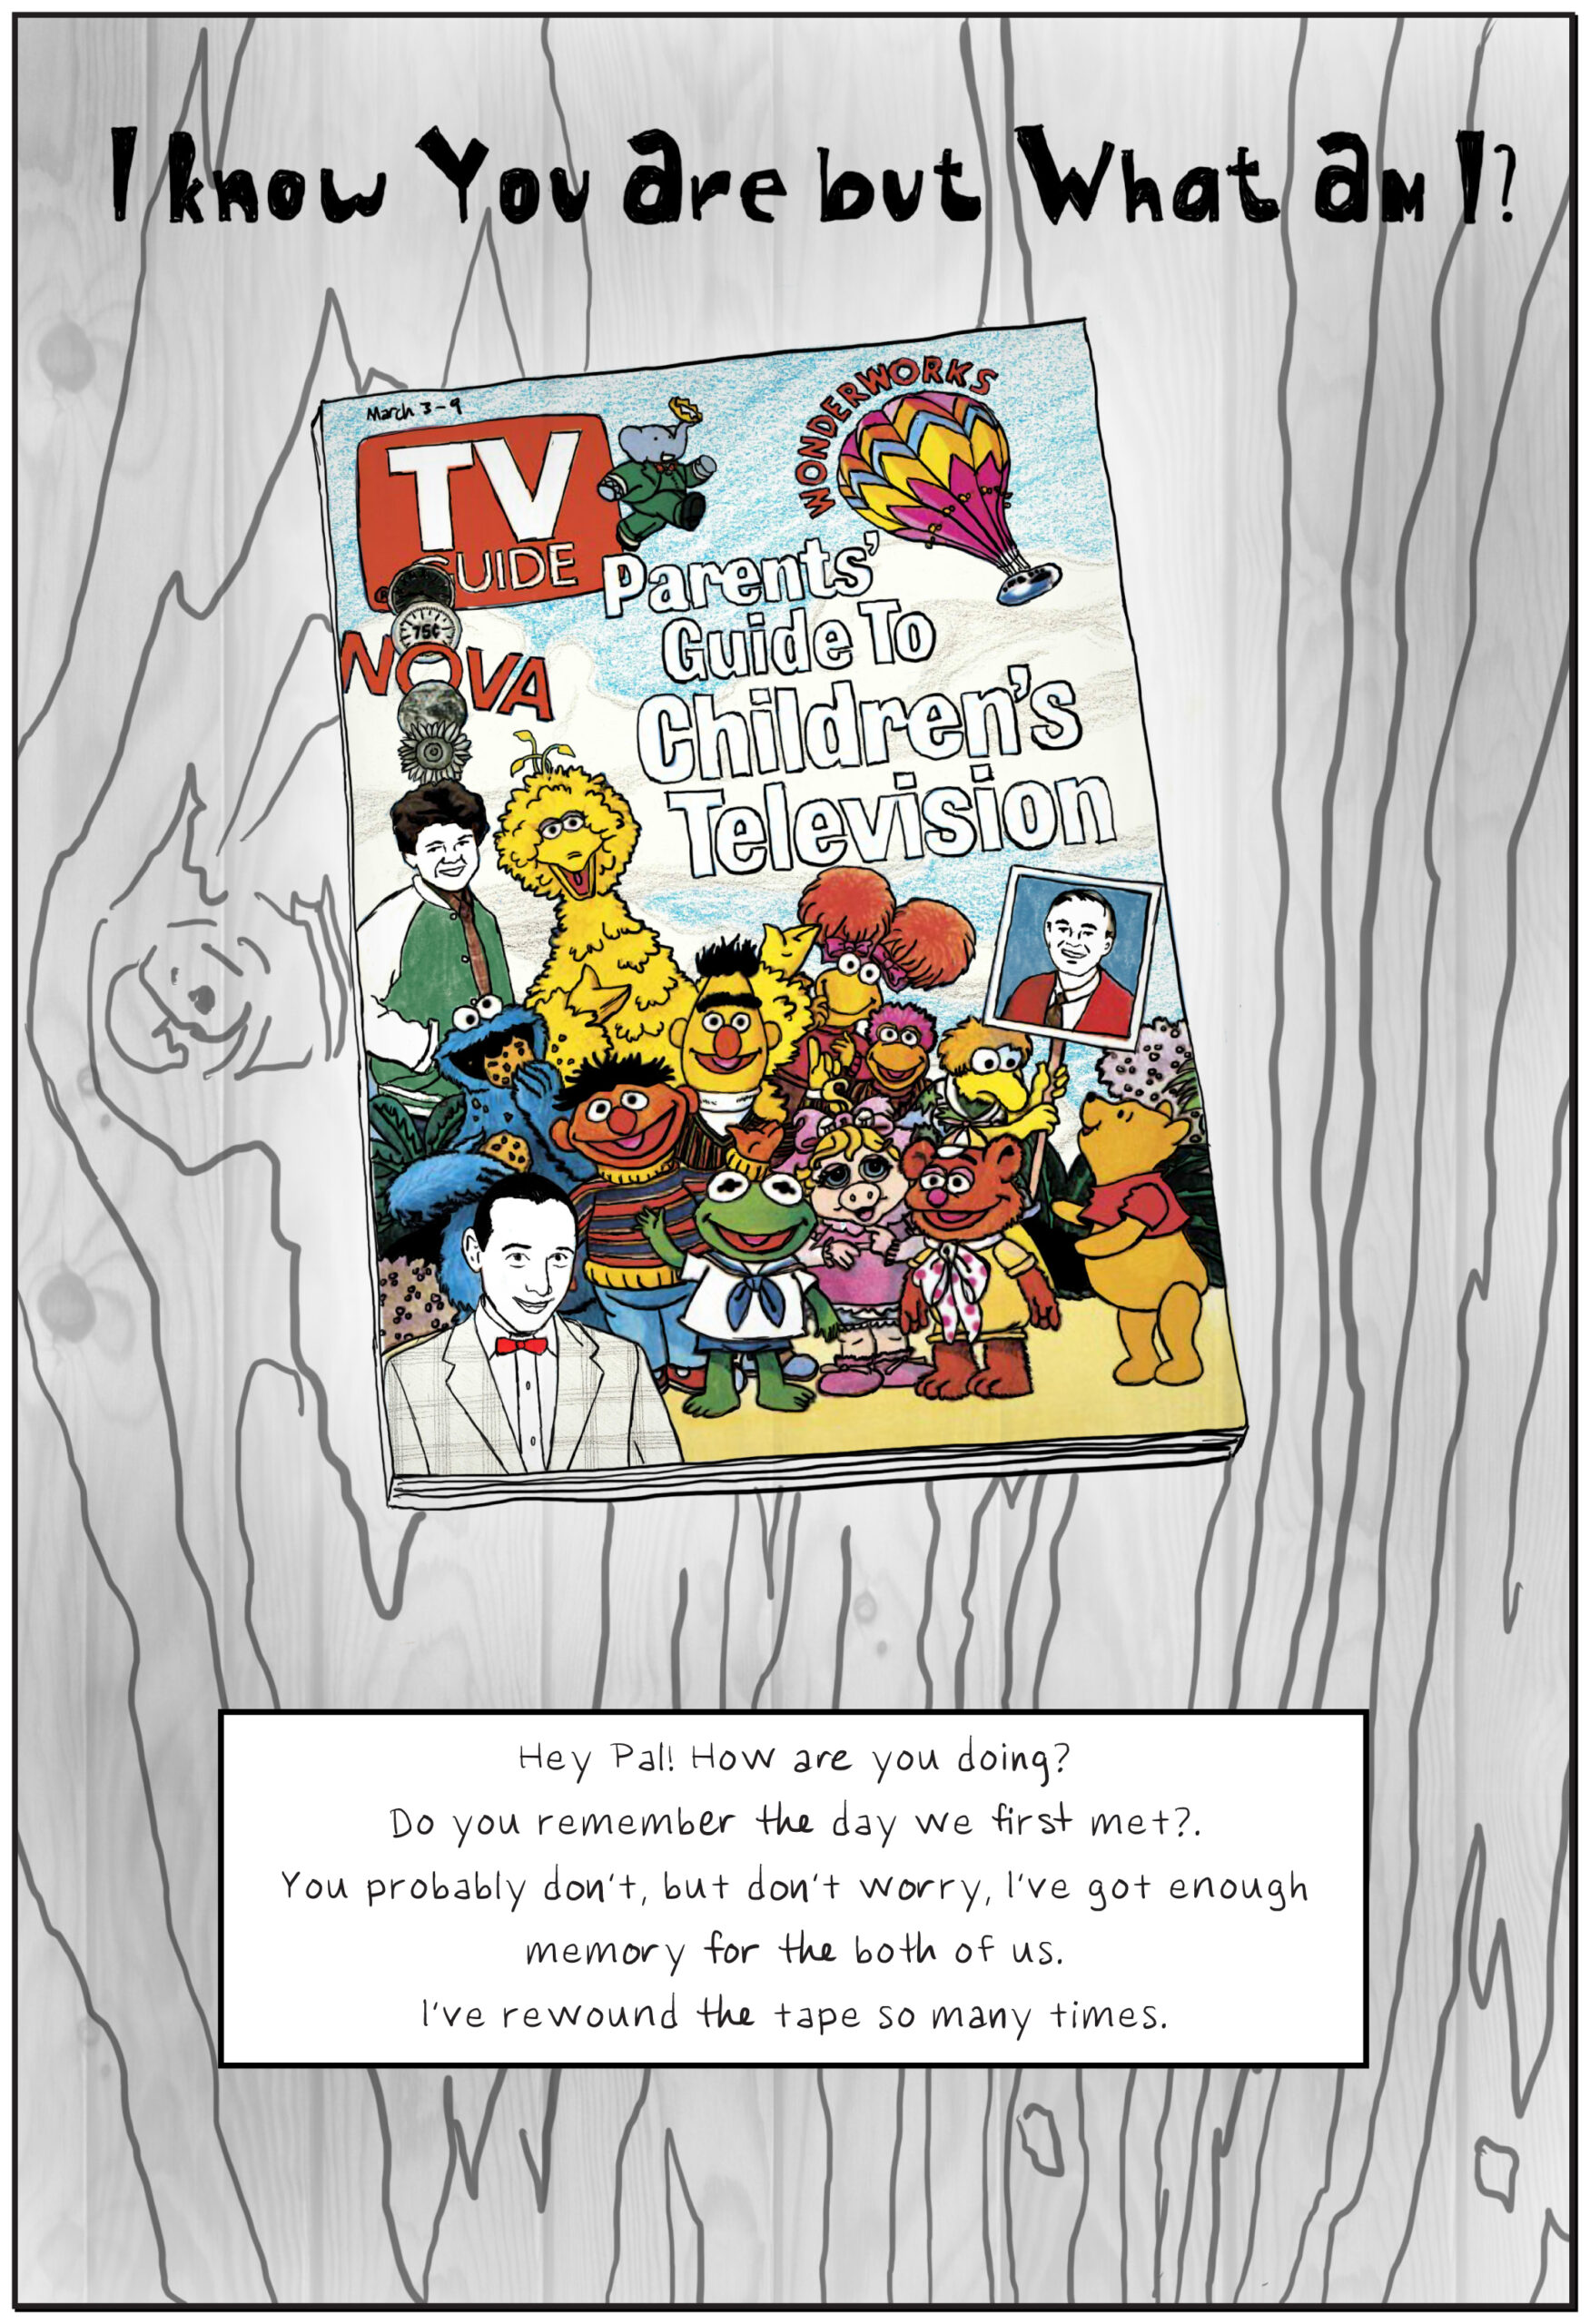 A colorful drawing of a 1980's issue of TV Guide featuring Mr. Rogers, Babar, the Muppets from Sesame Street, and Pee-wee Herman. It is lying on a wooden table with the wood grain rendered in black and white. Text: Hey Pal! How are you doing? Do you remember the day we first met?. You probably don’t, but don’t worry, I’ve got enough memory for the both of us. I’ve rewound the tape so many times.